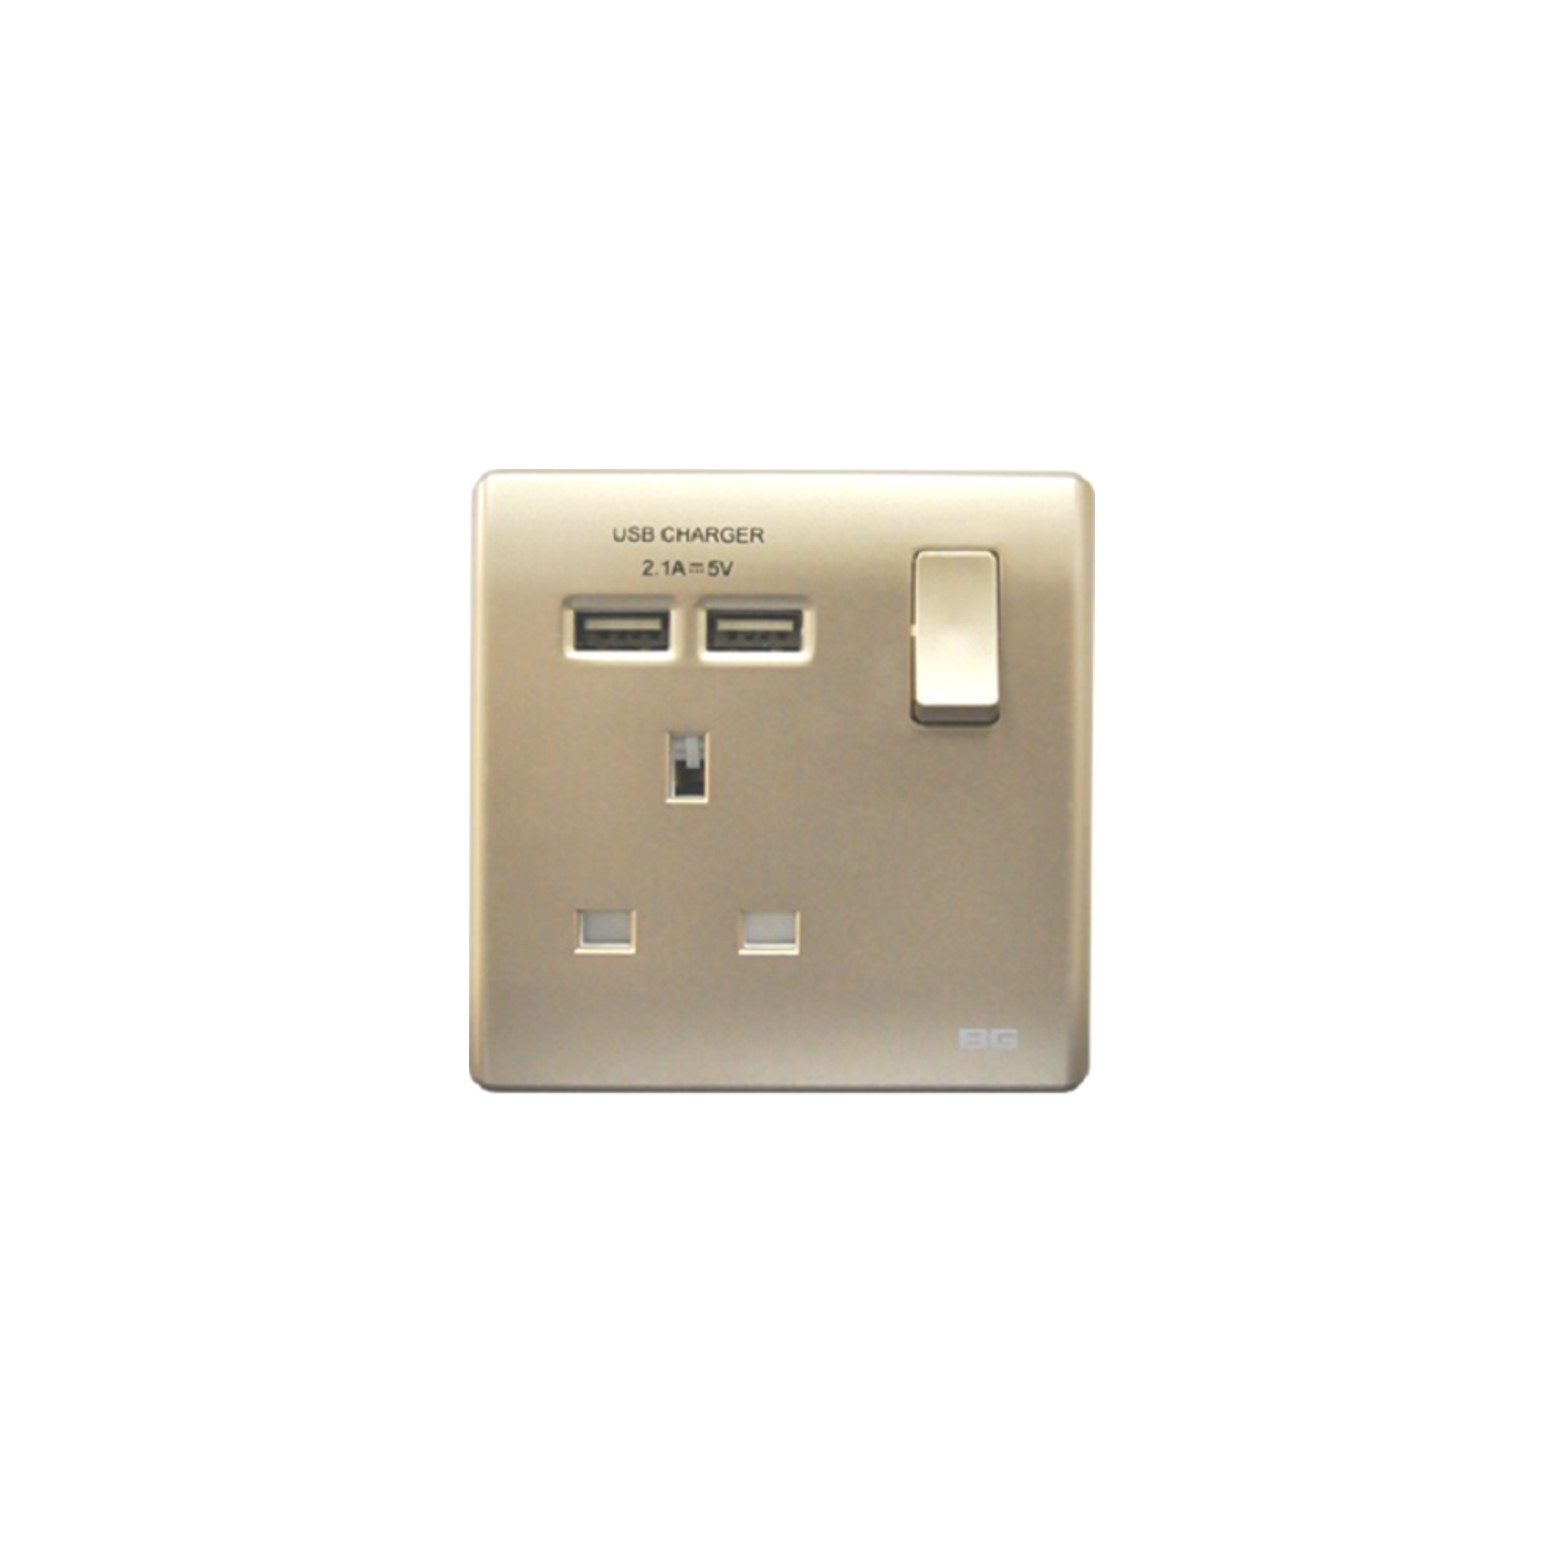 Champagne SlimLine 2USB 2.1A 1-Gang 13A Switched Socket, USB Charger 86 type wall BS/UK(PCCH21U2)